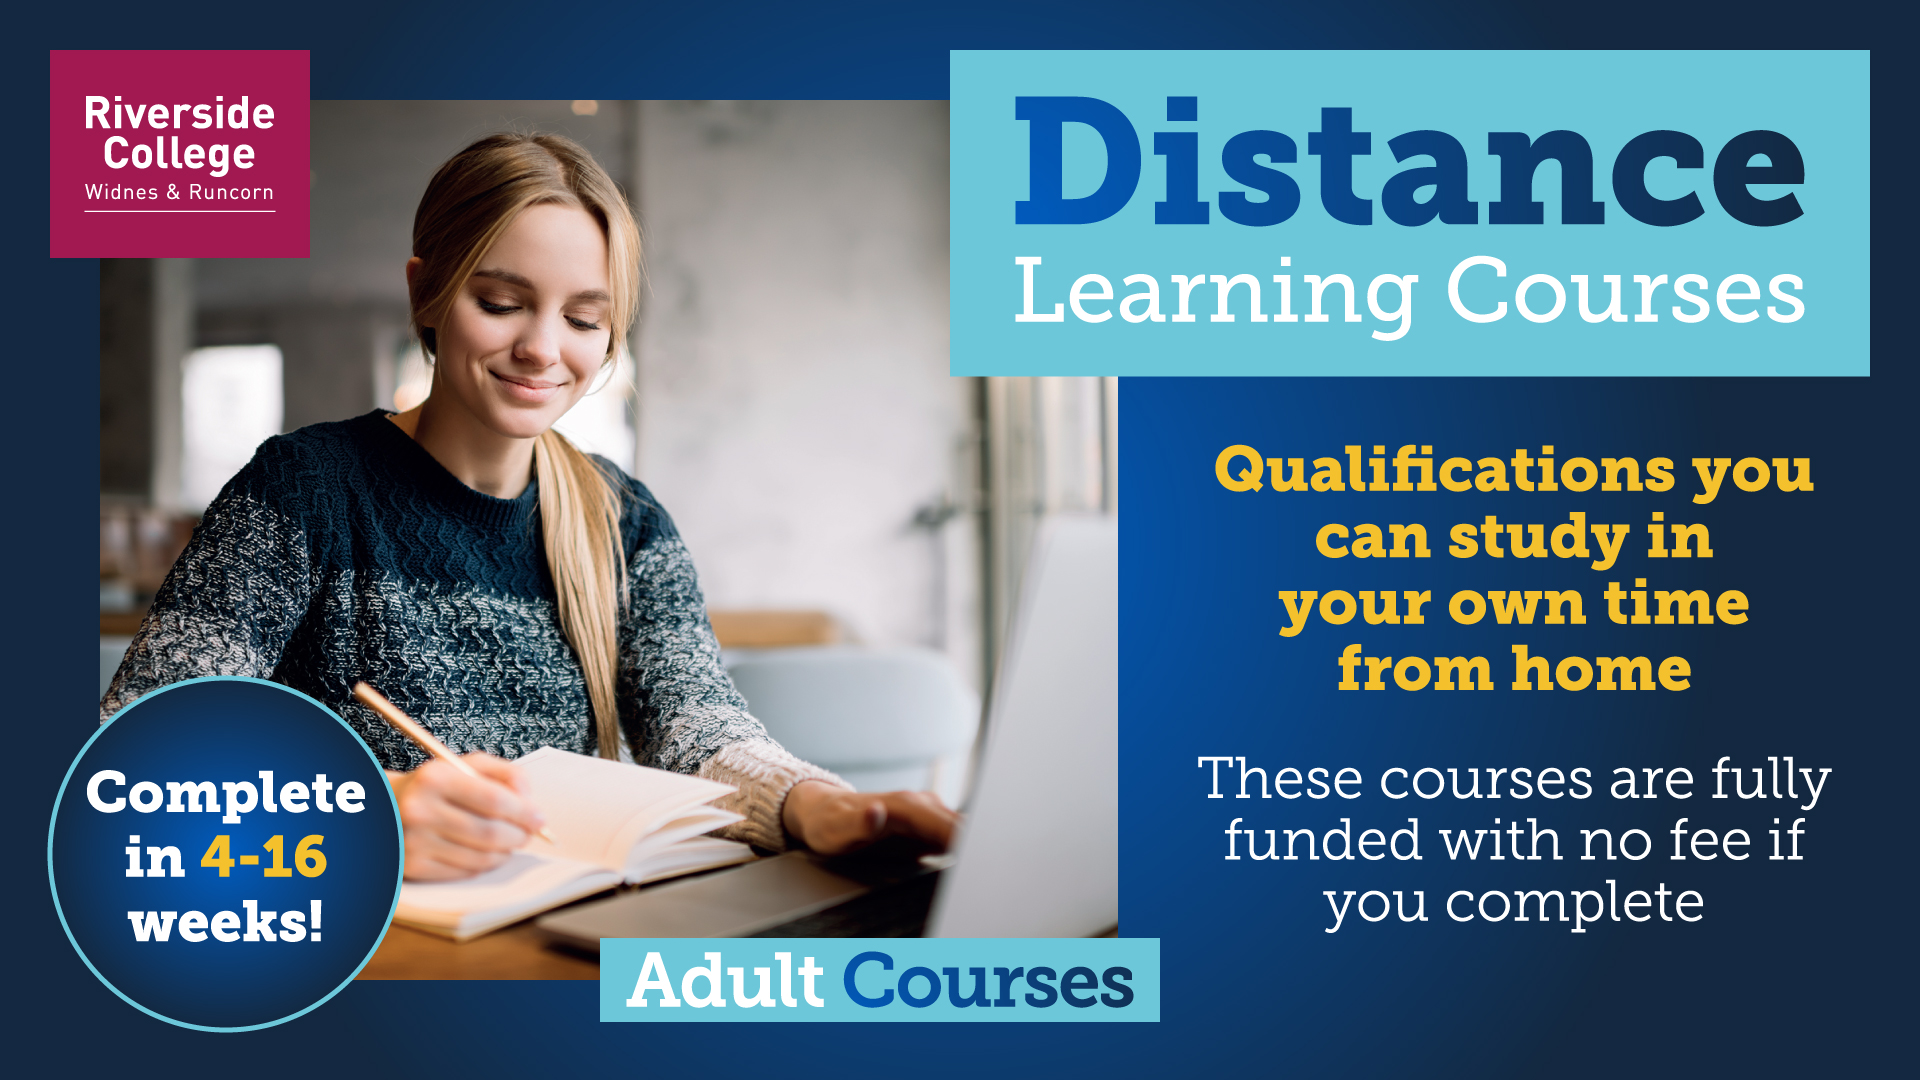 Distance Learning Courses, Qualifications you can study in your own time from home